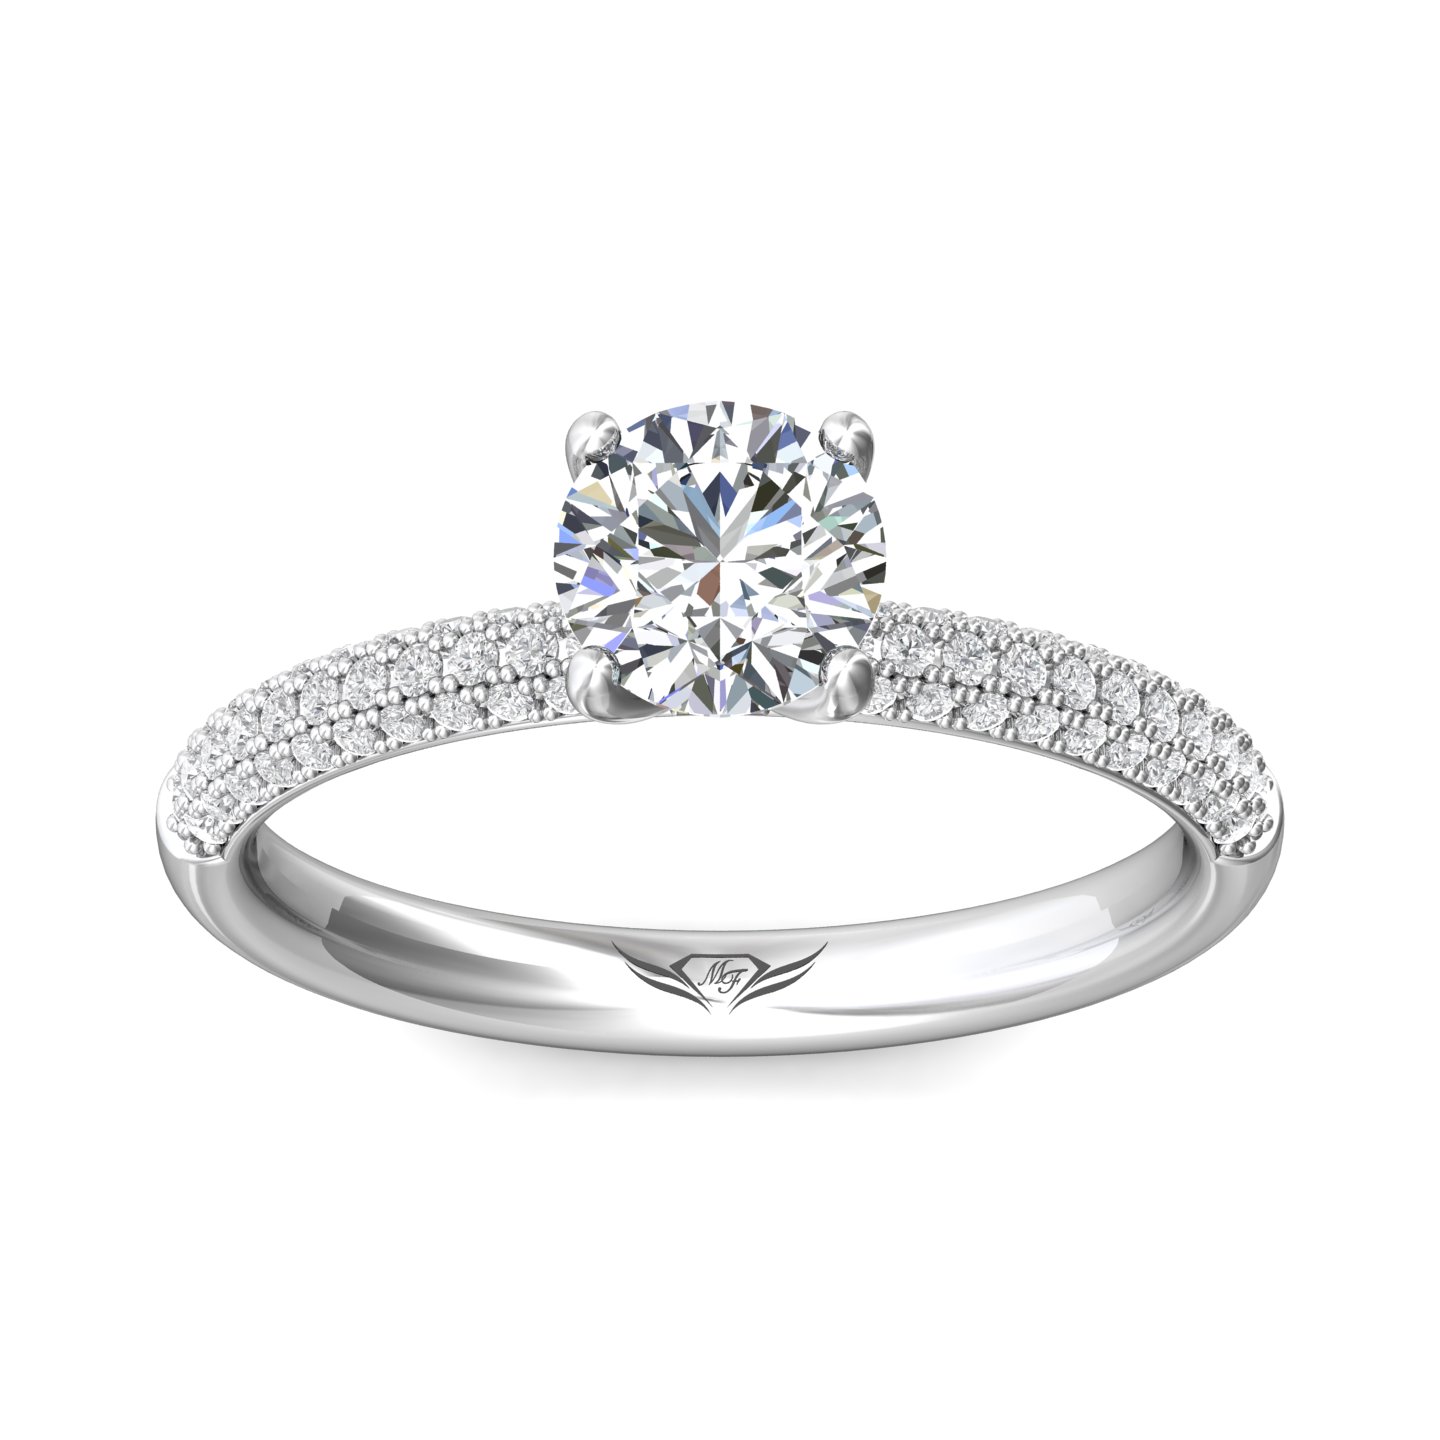 14K White Gold FlyerFit Micropave Engagement Ring Image 3 Christopher's Fine Jewelry Pawleys Island, SC